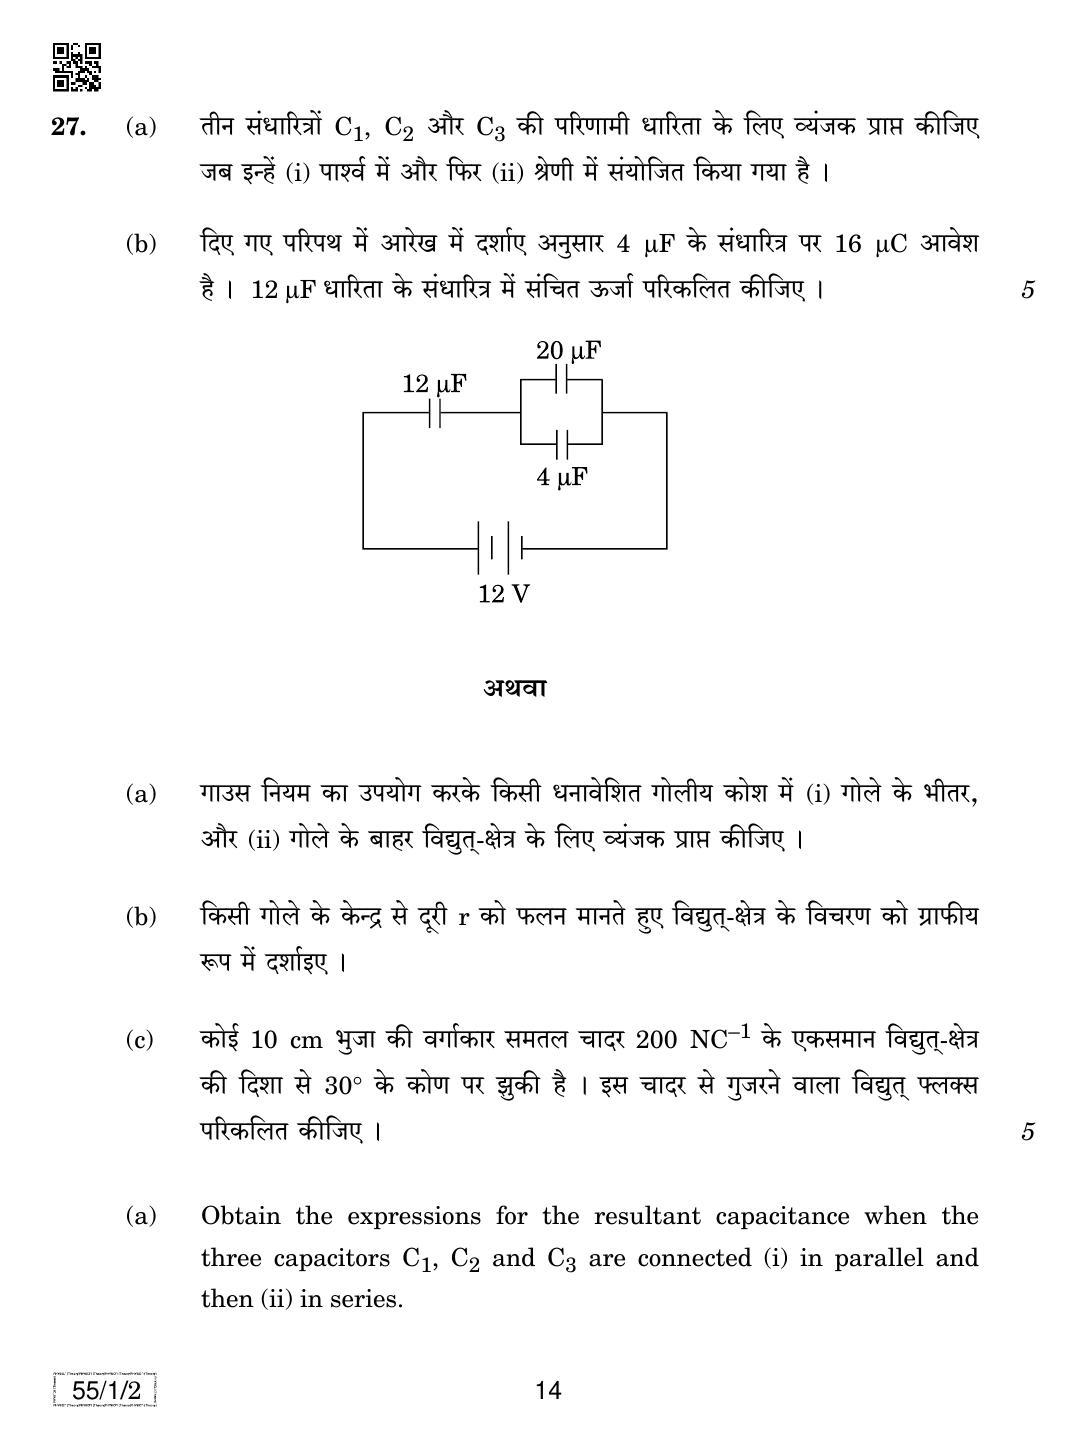 CBSE Class 12 55-1-2 PHYSICS 2019 Compartment Question Paper - Page 14